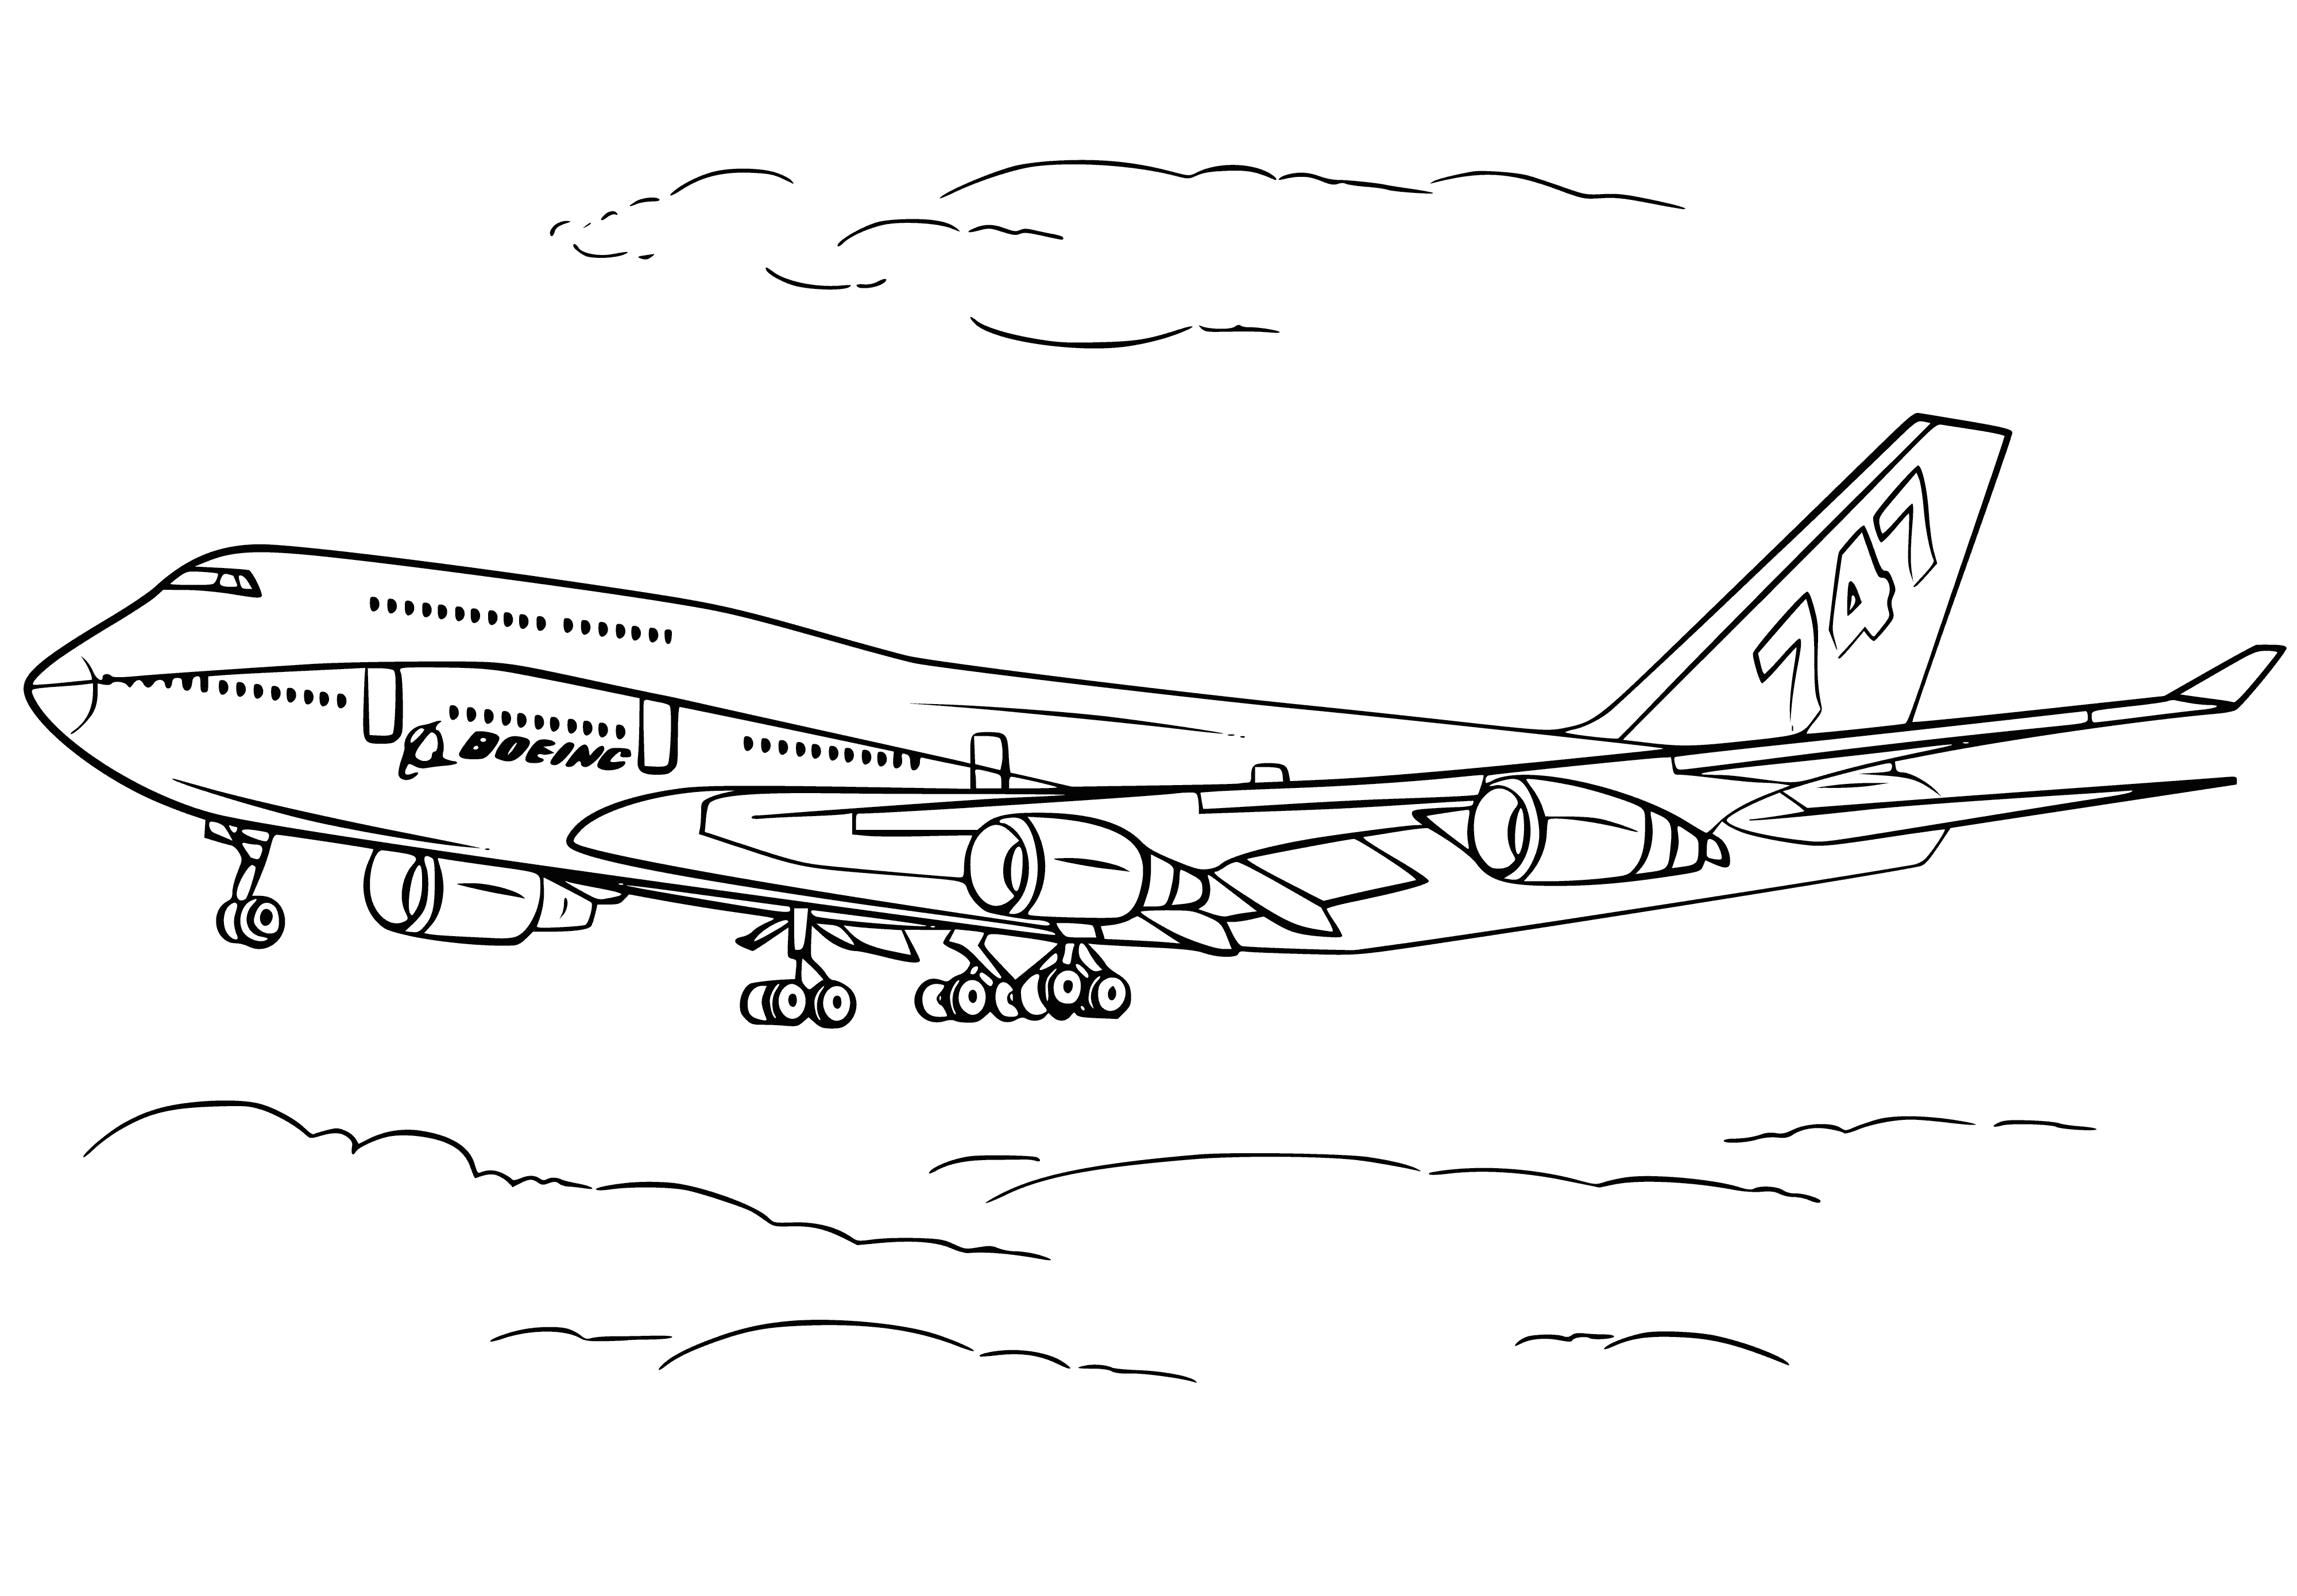 coloring page: Iconic wide-body jet, the Boeing 747 aka "Jumbo Jet," has carried passengers since 1969 & distinguished by its distinctive "hump" upper deck.